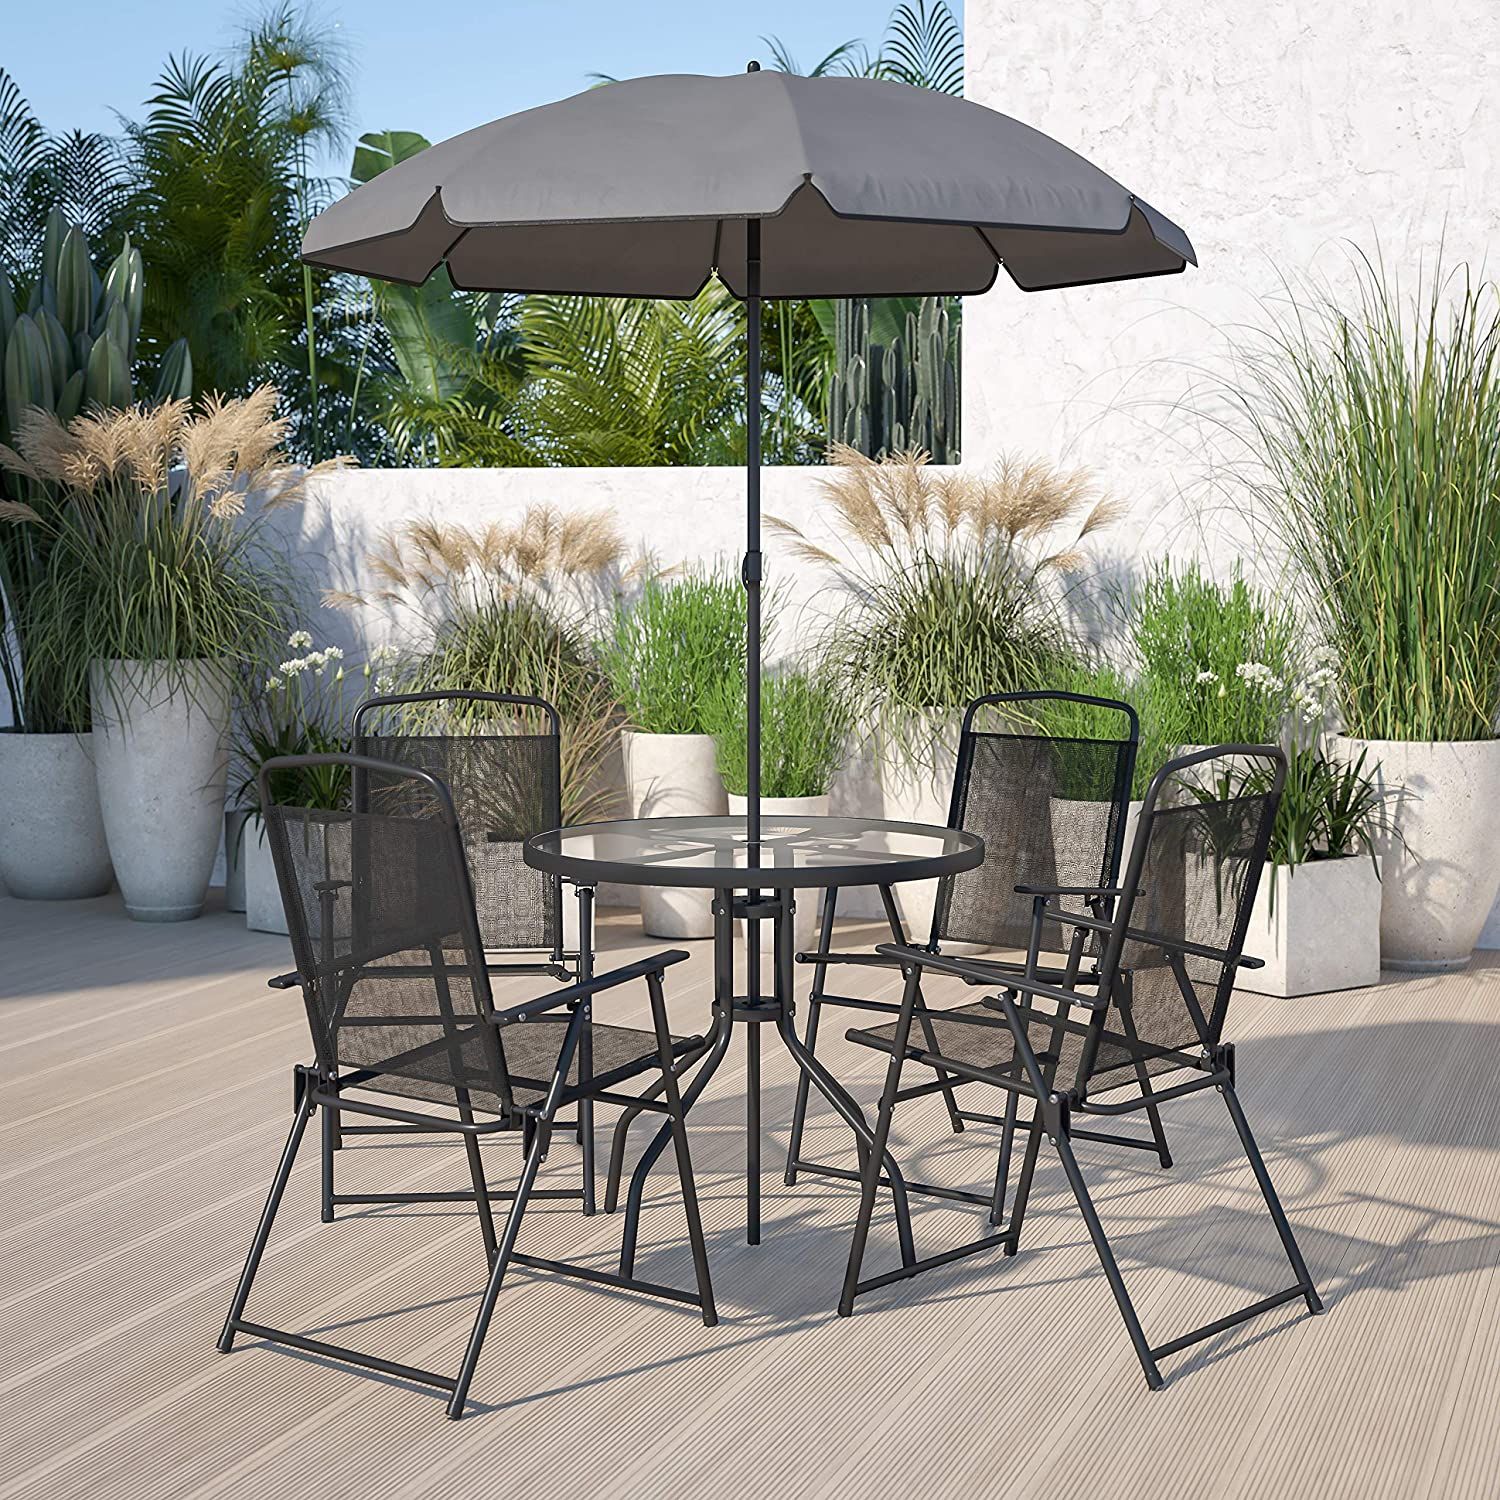 8 Best Patio Furniture Sets 2022 The, Best Outdoor Furniture Sets